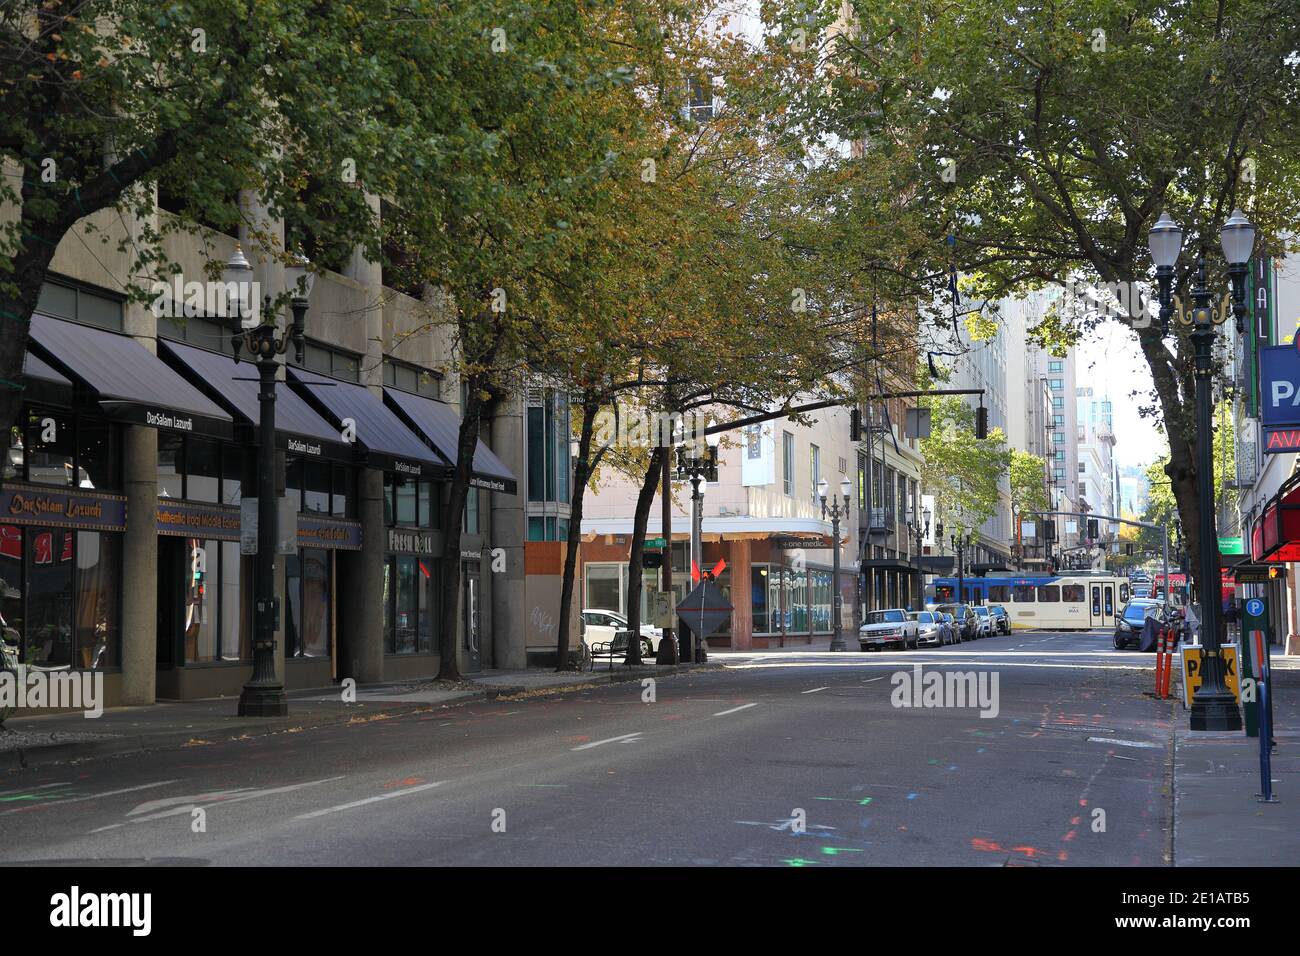 Portland, Oregon - 0ct, 26, 2020: Editorial image - General View of downtown Portland in the fall at the corner of SW Alder St. with the Max passing i. Stock Photo